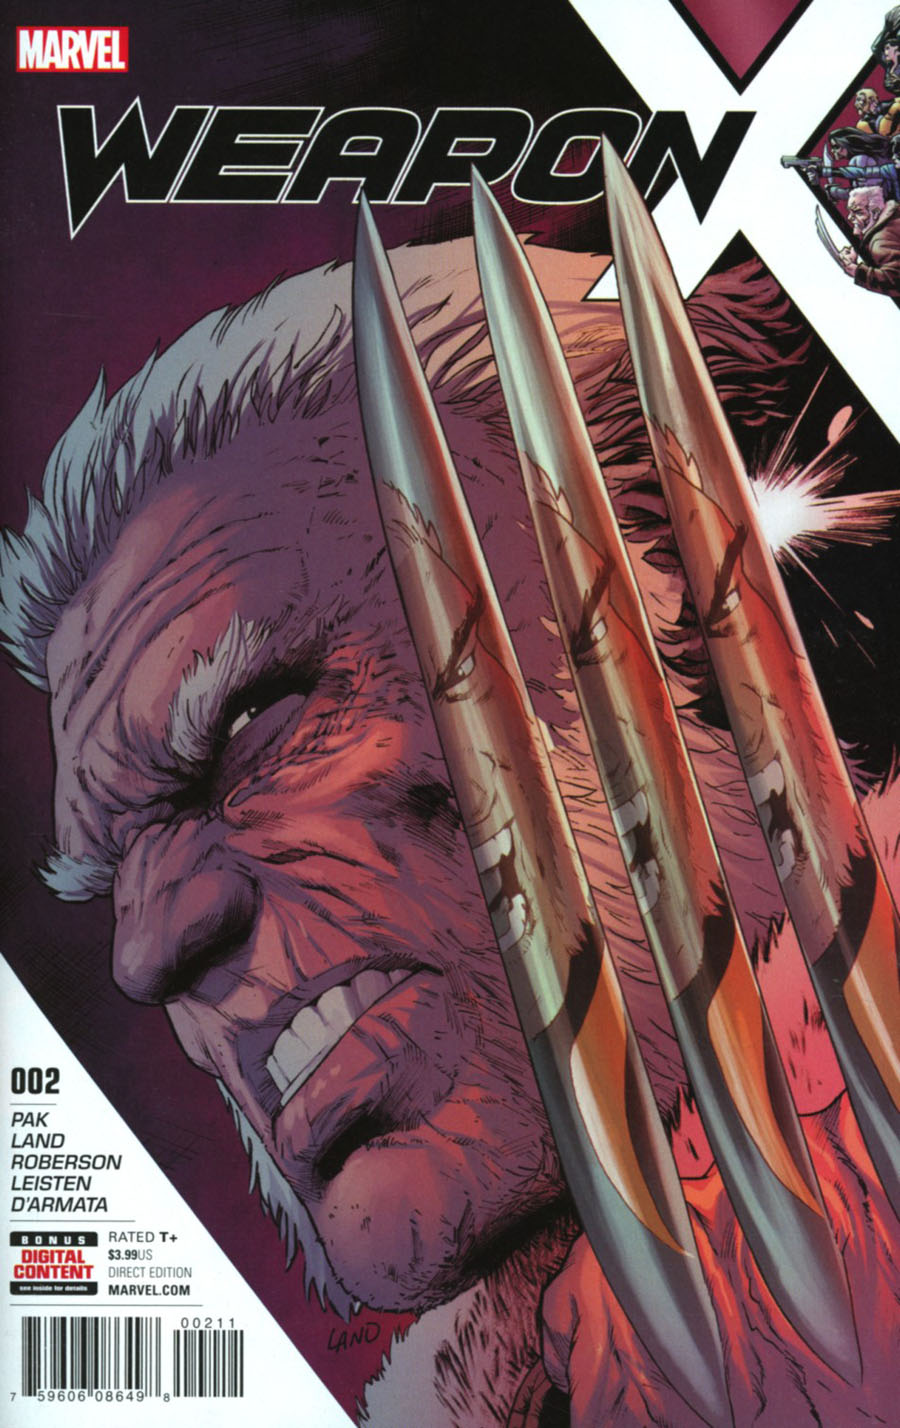 Weapon X Vol 3 #2 Cover A 1st Ptg Regular Greg Land Cover (Resurrxion Tie-In)